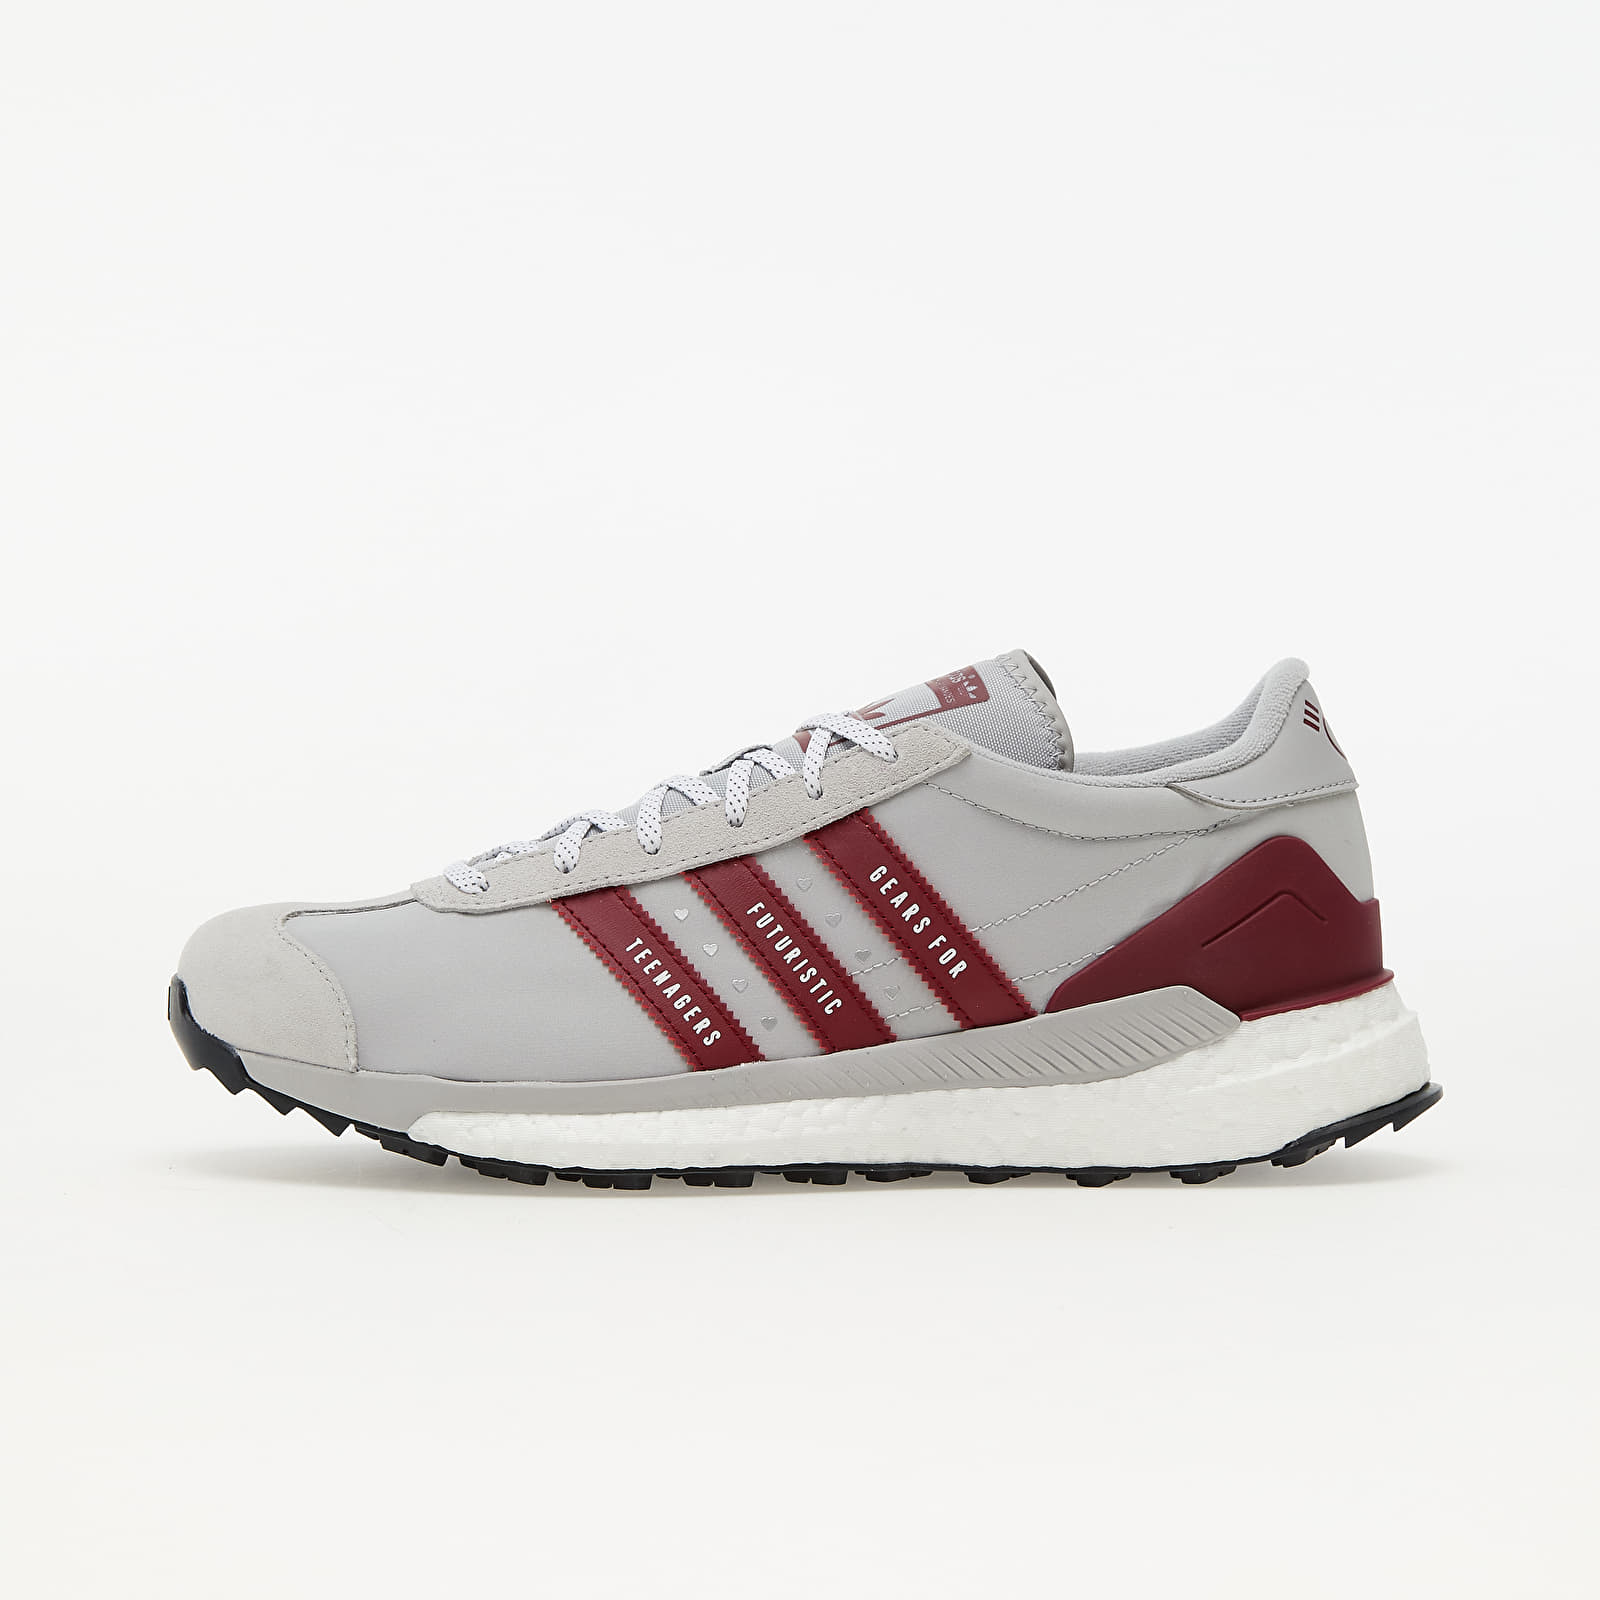 Men's shoes adidas Country Human Made Grey Two/ Collegiate Burgundy/ Core Black